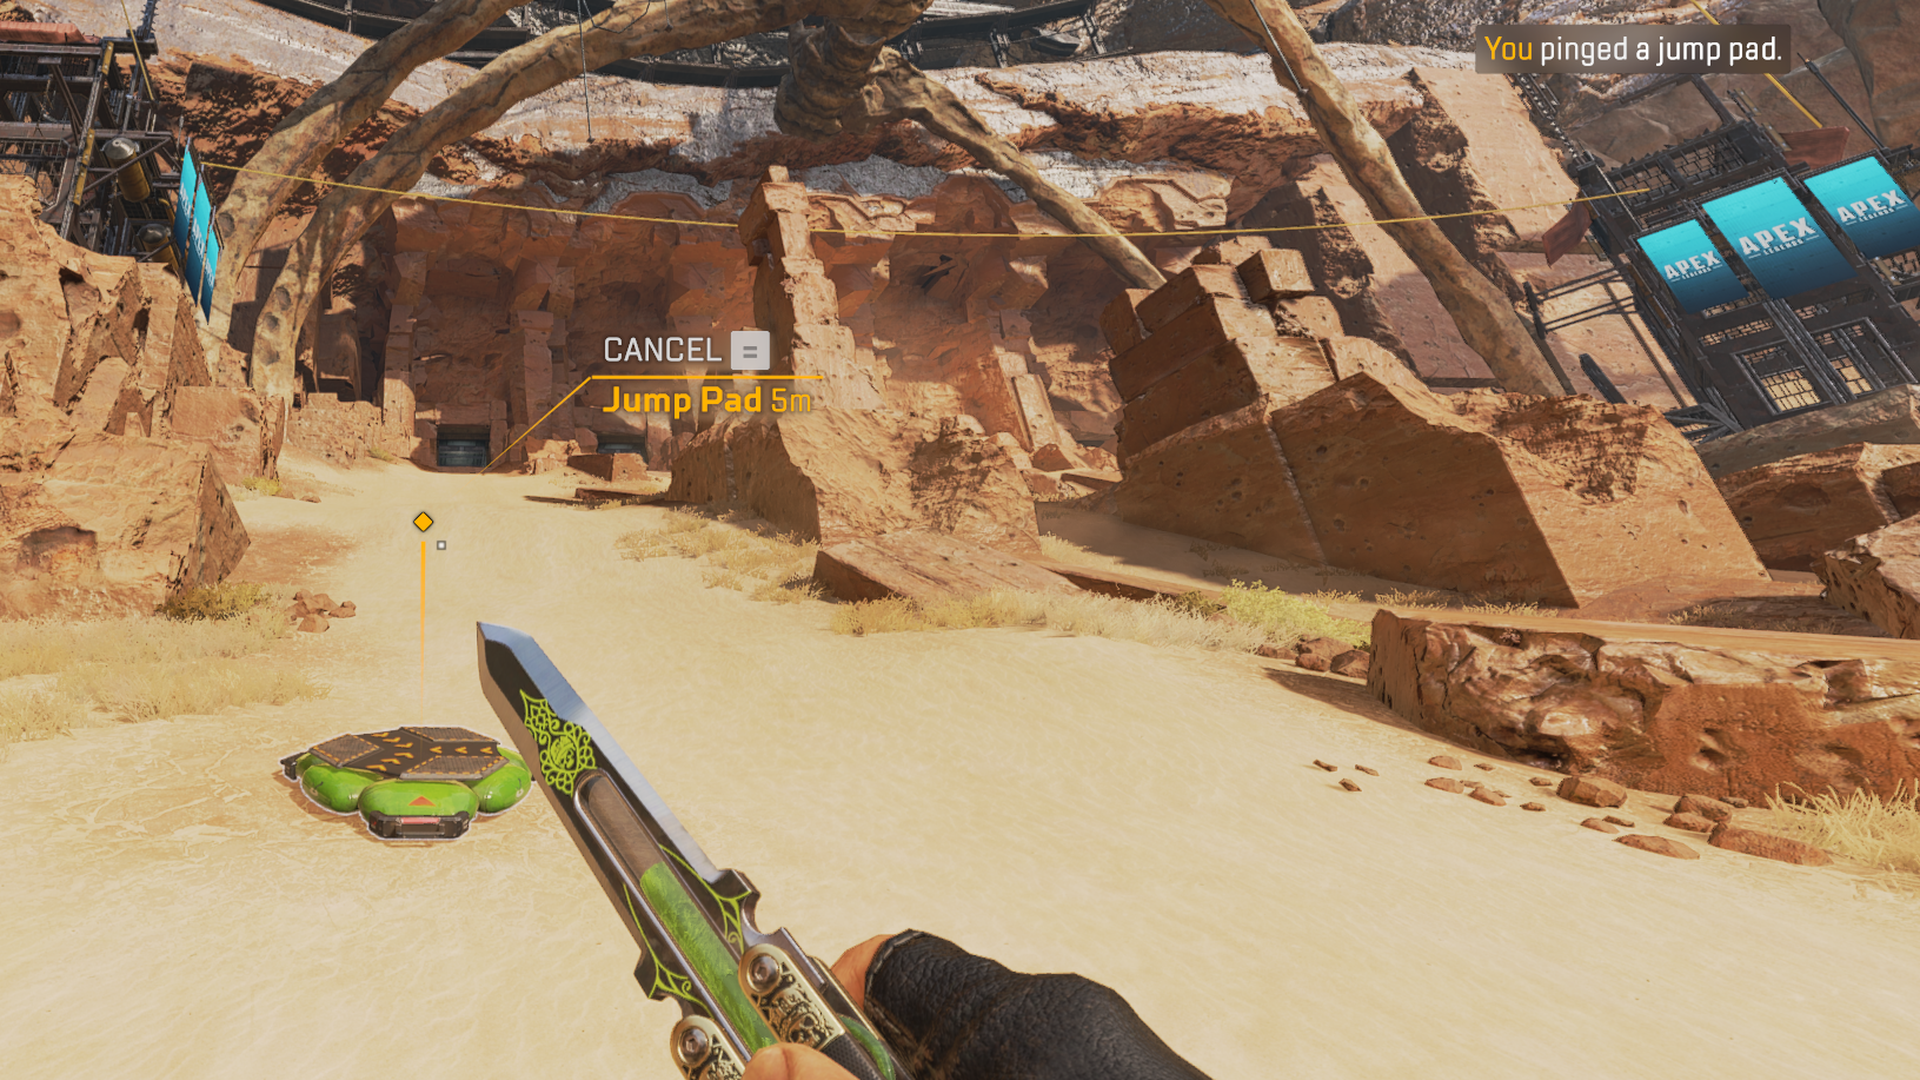 A player uses the Ping System in "Apex Legends" to let the team know of the placement of a Jump Pad.